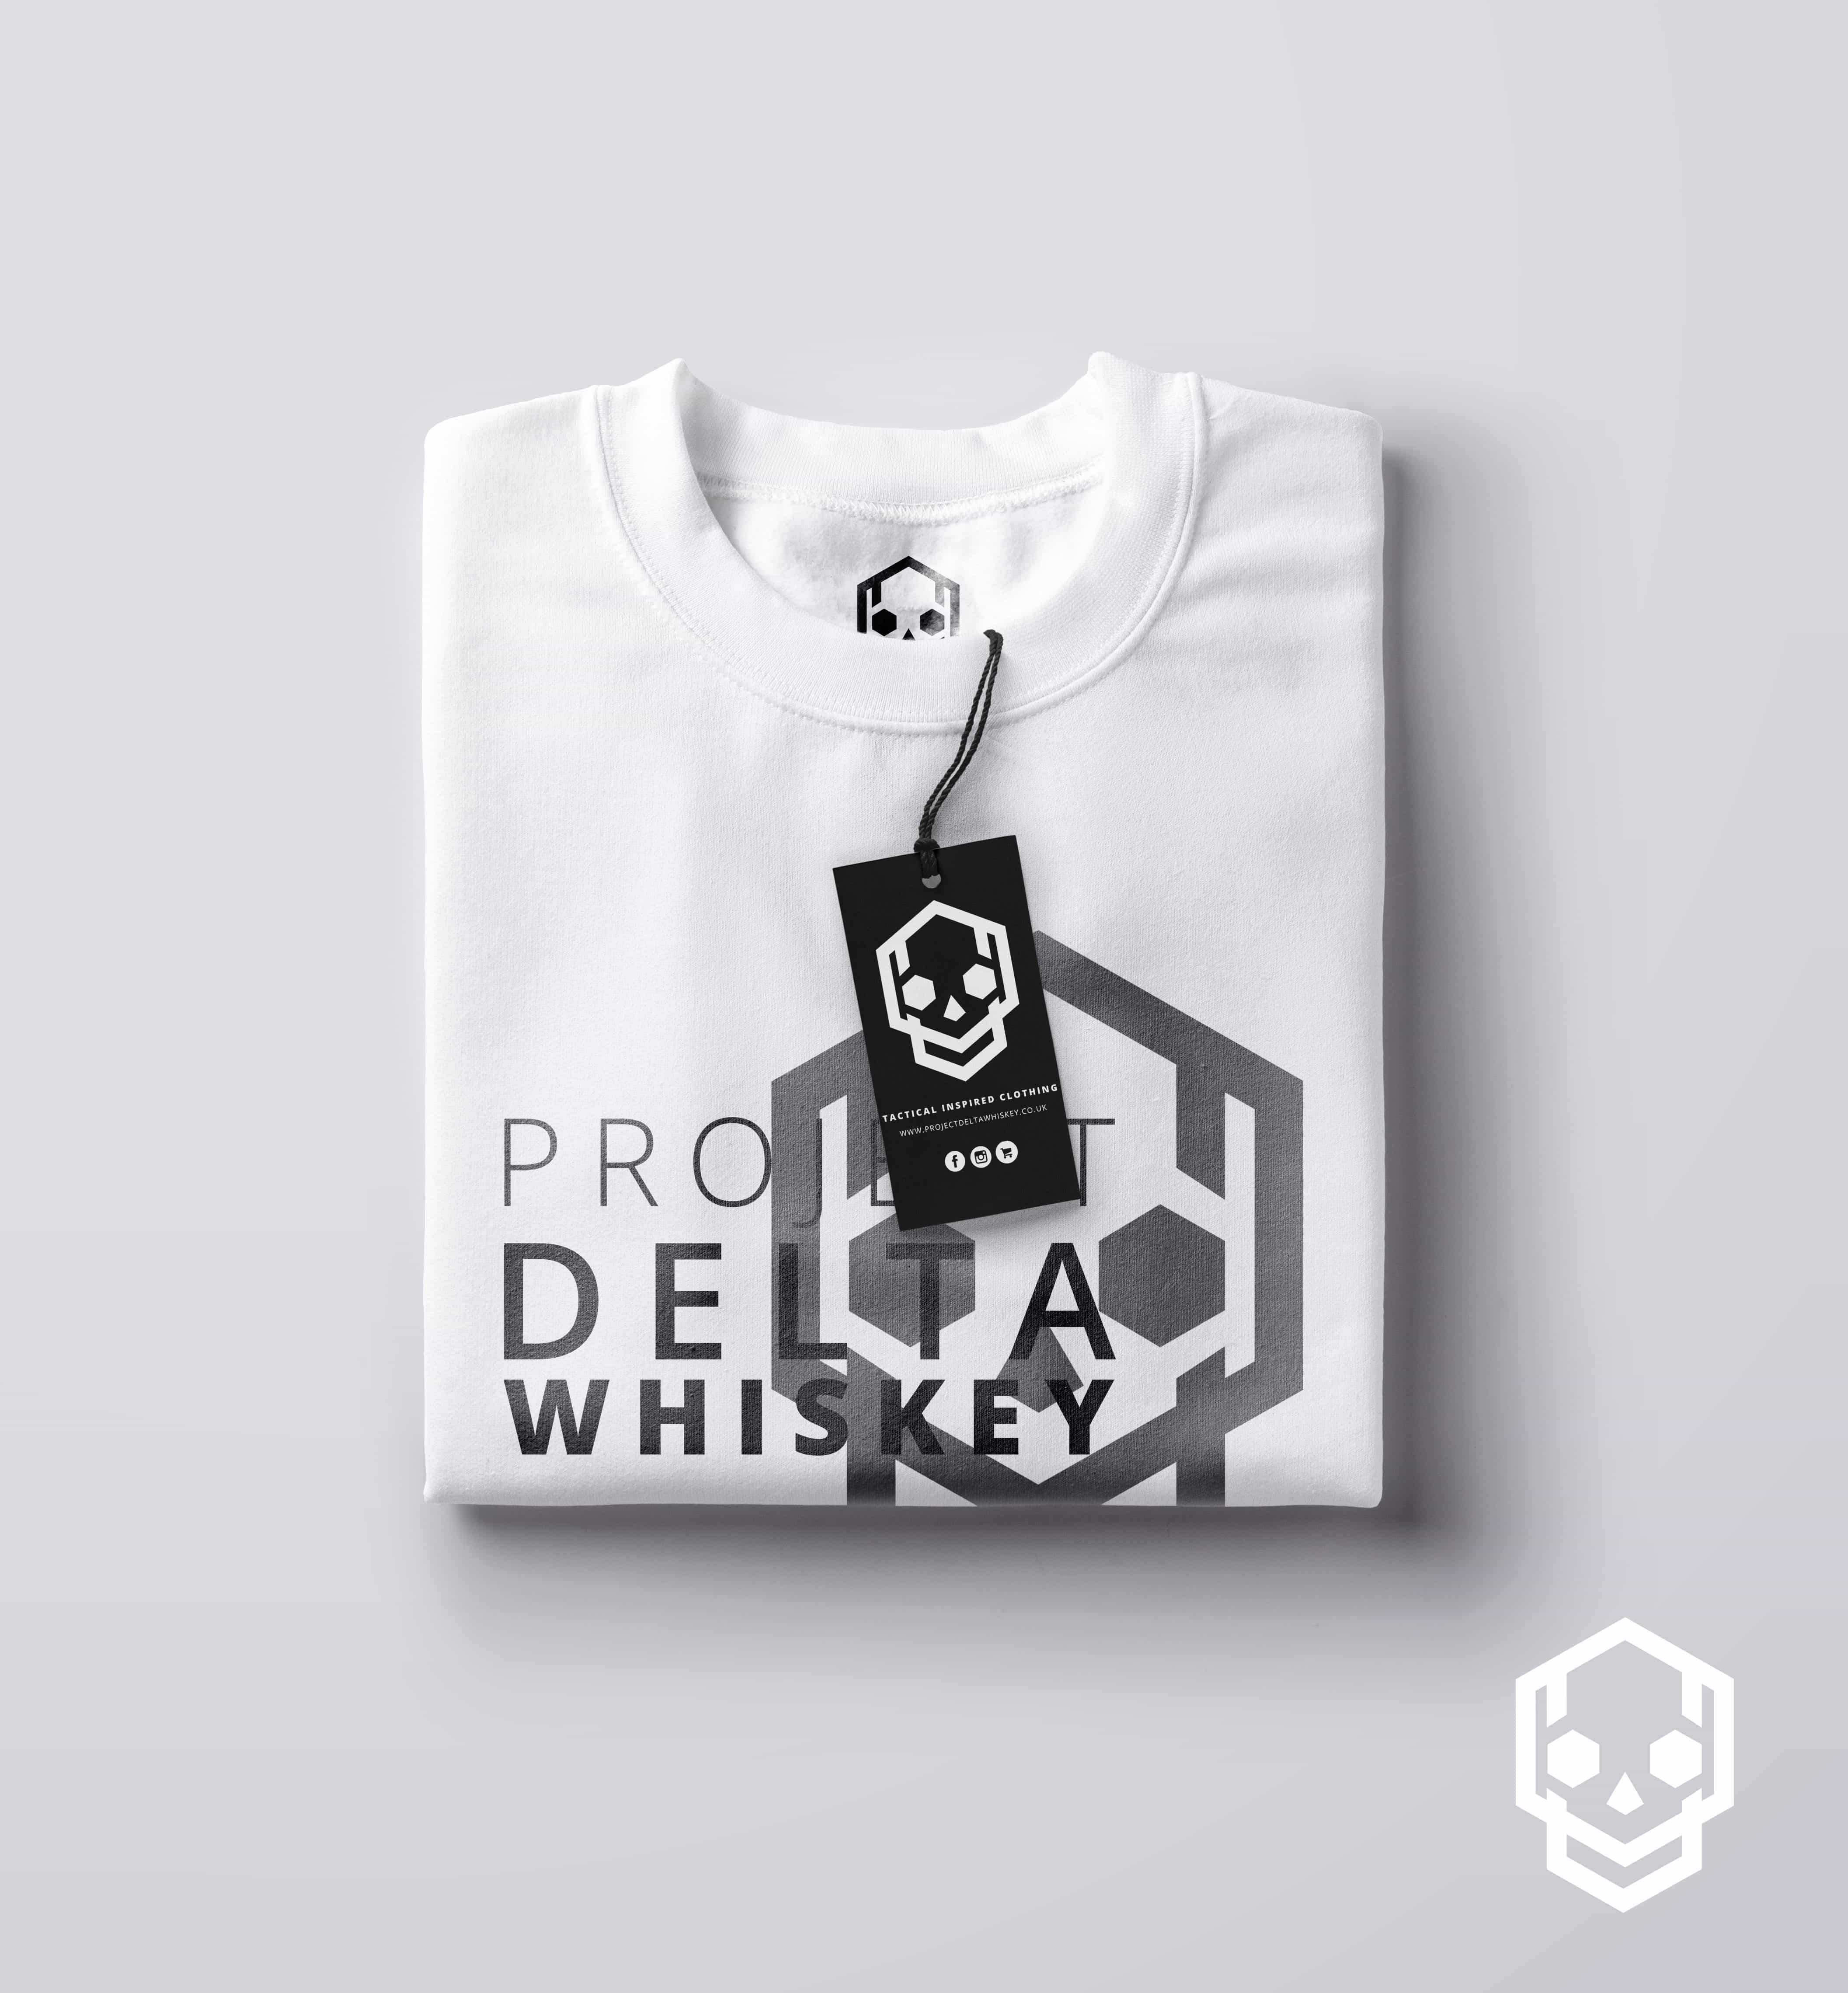 Black and White Airsoft Logo - PDW Emblem T-Shirt | UK Airsoft T-Shirts & Tops | Project Delta Whiskey